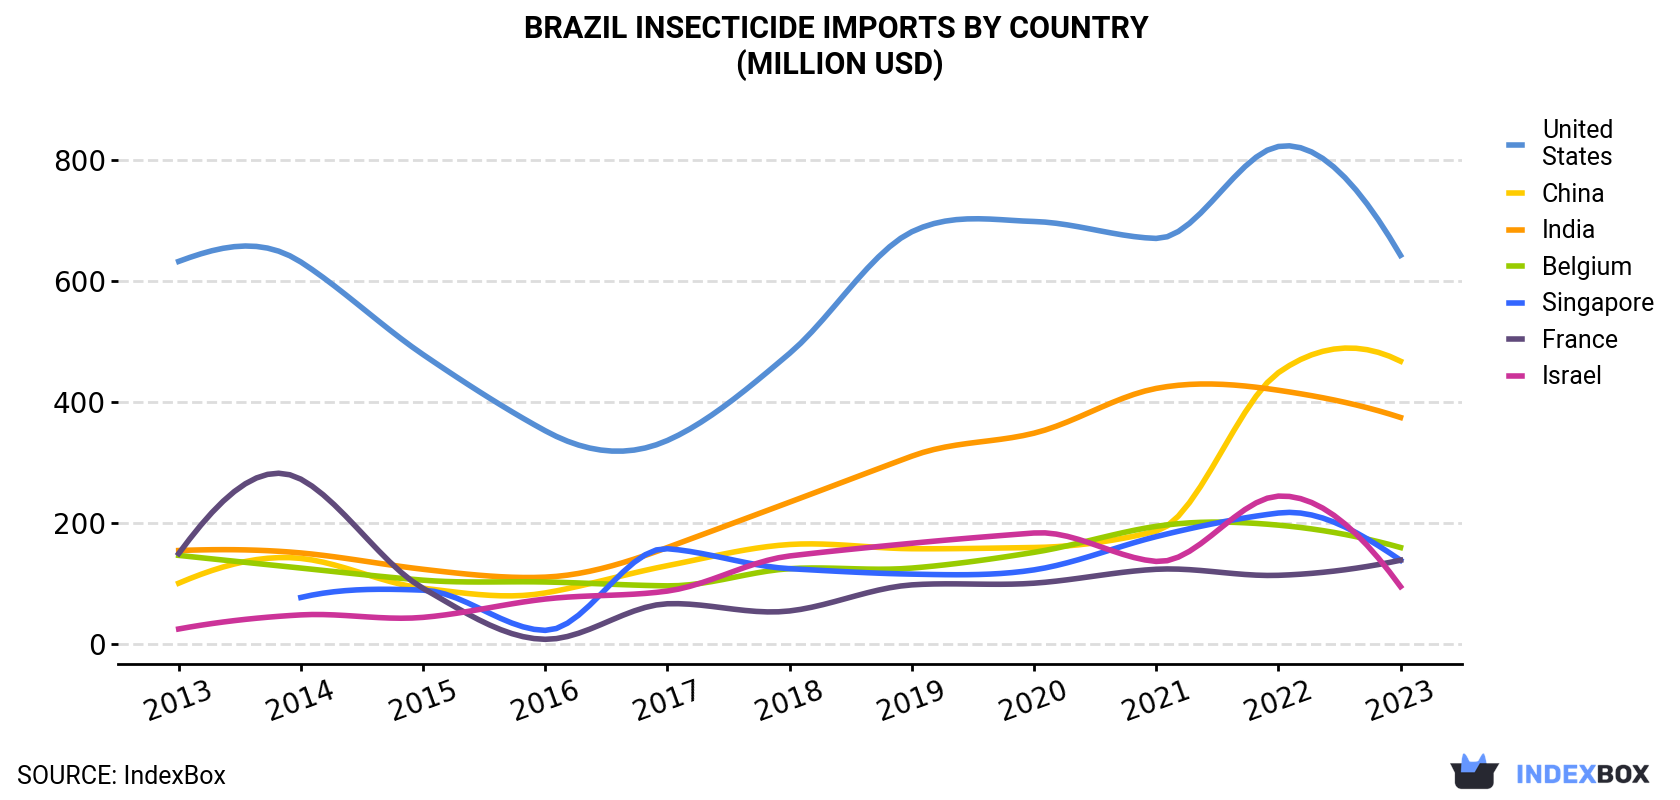 Brazil Insecticide Imports By Country (Million USD)